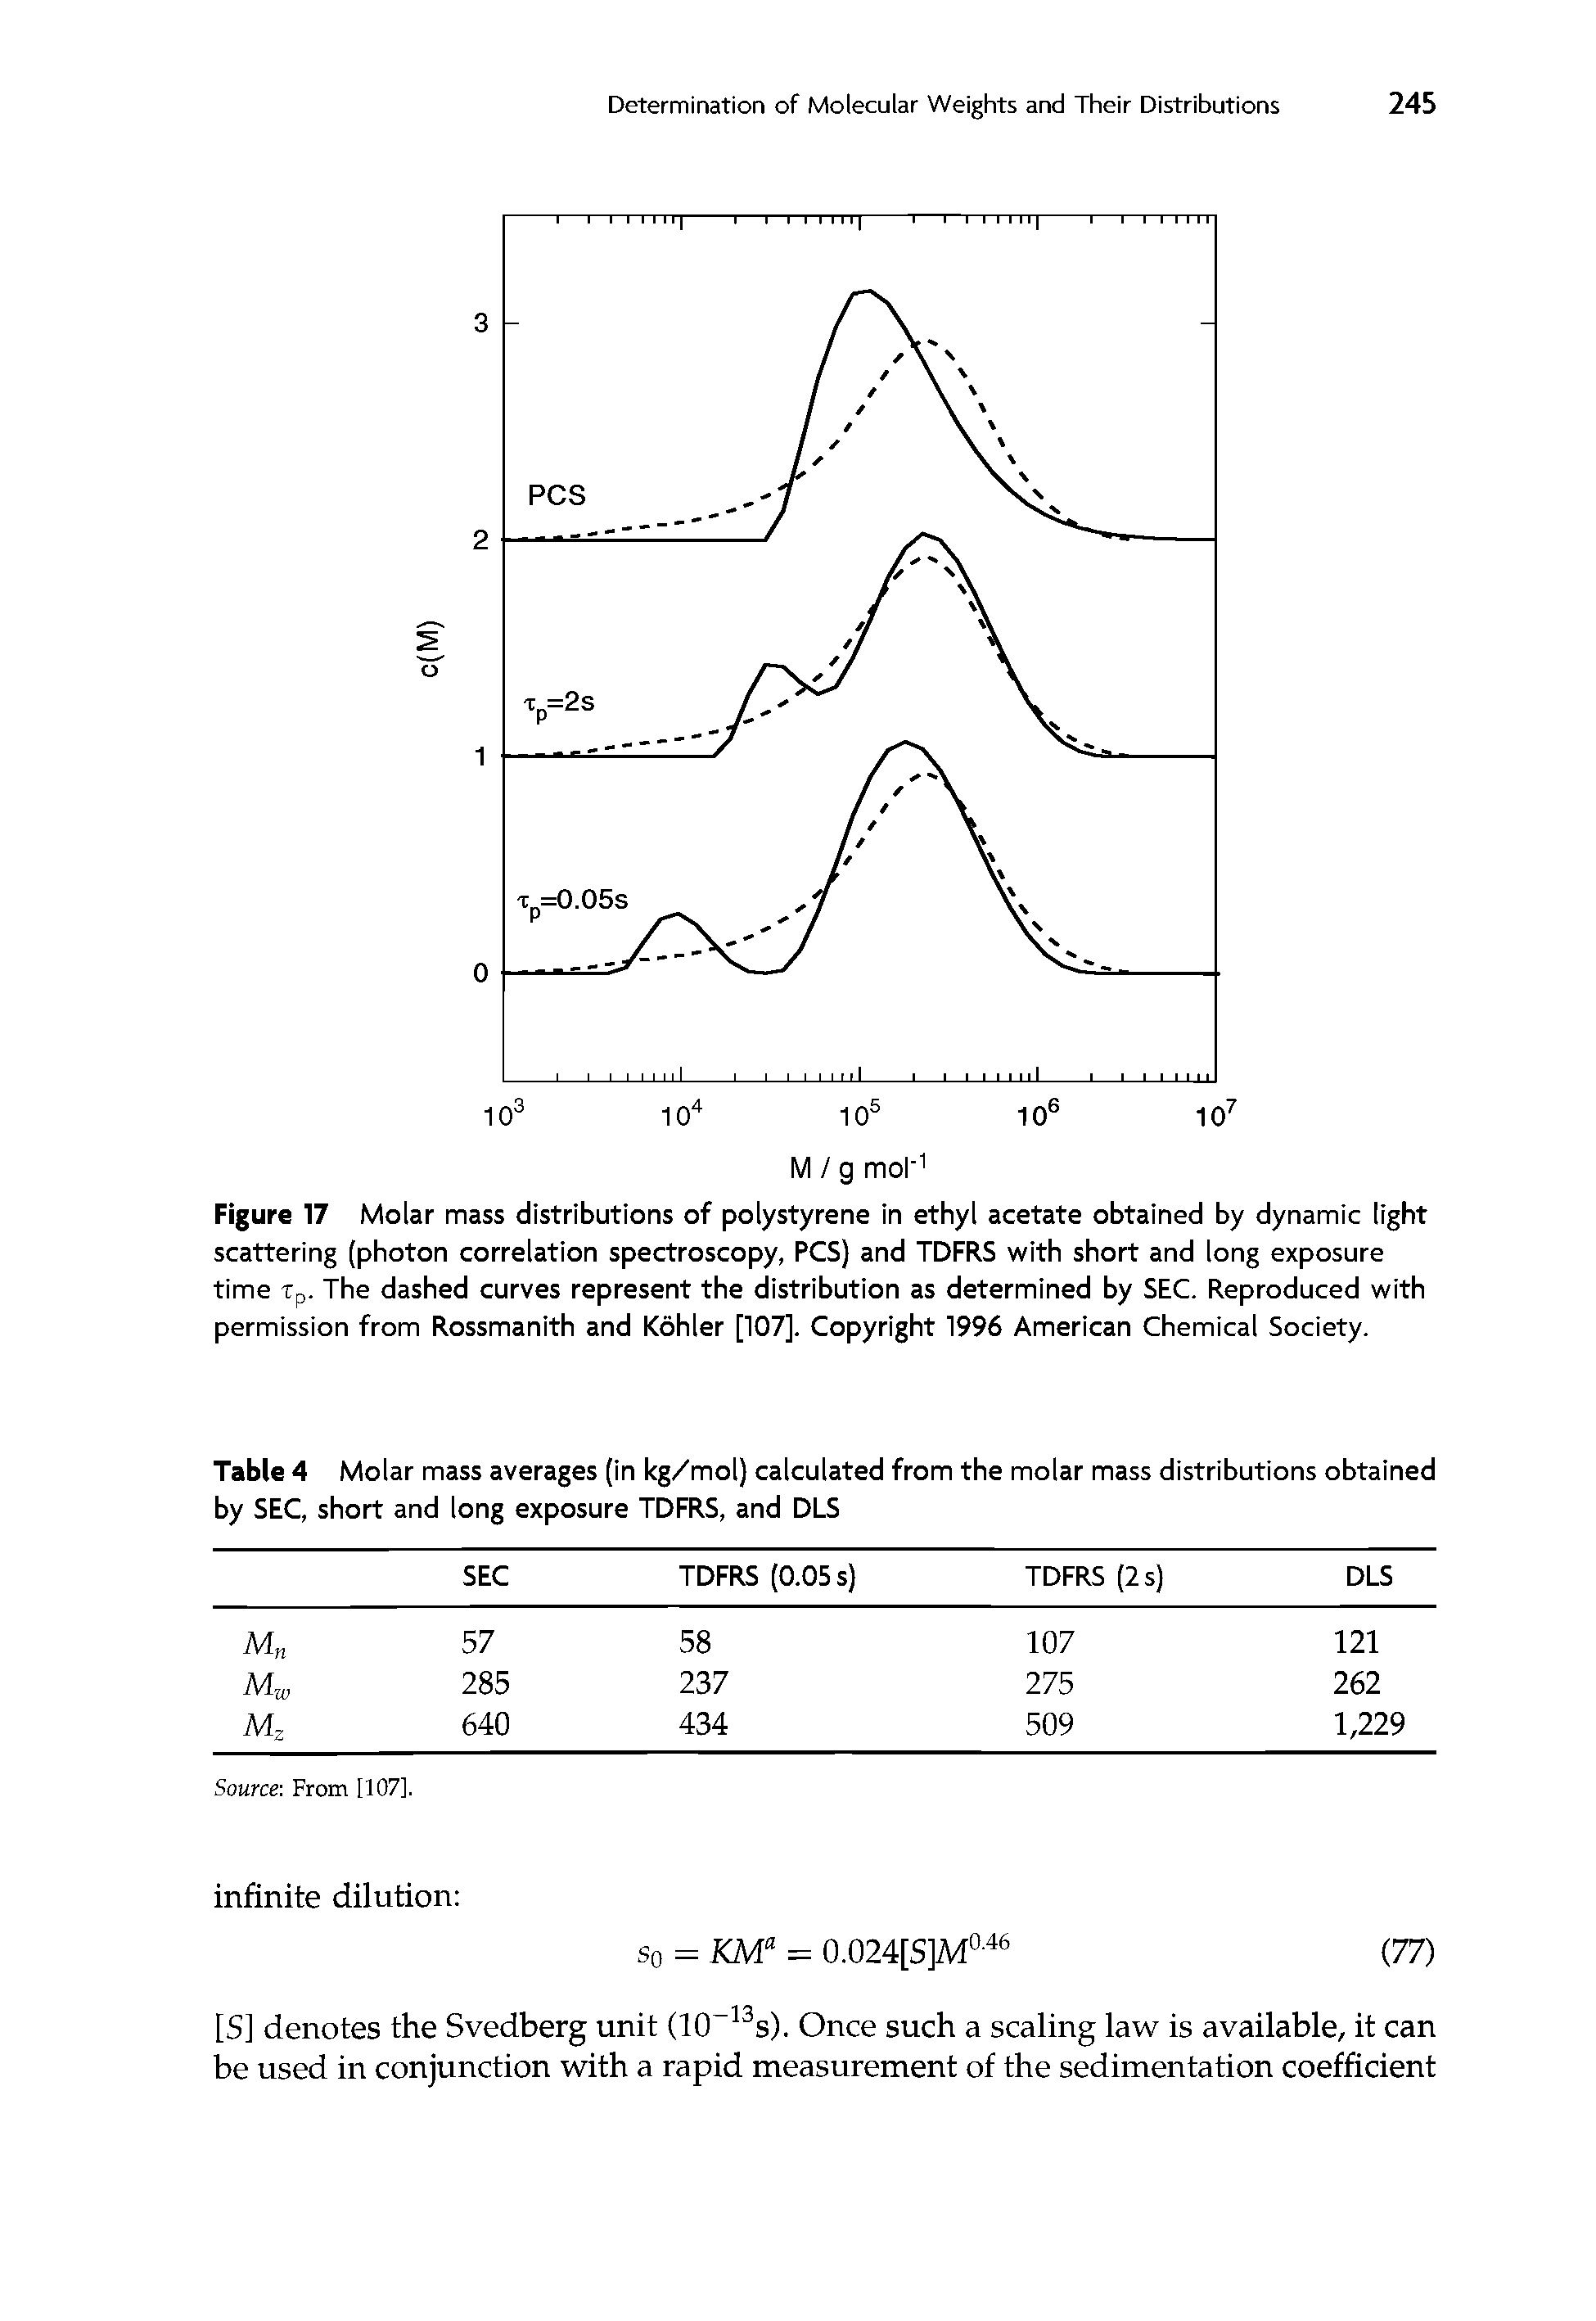 Figure 17 Molar mass distributions of polystyrene in ethyl acetate obtained by dynamic light scattering (photon correlation spectroscopy, PCS) and TDFRS with short and long exposure time tp. The dashed curves represent the distribution as determined by SEC. Reproduced with permission from Rossmanith and Kohler [107]. Copyright 1996 American Chemical Society.